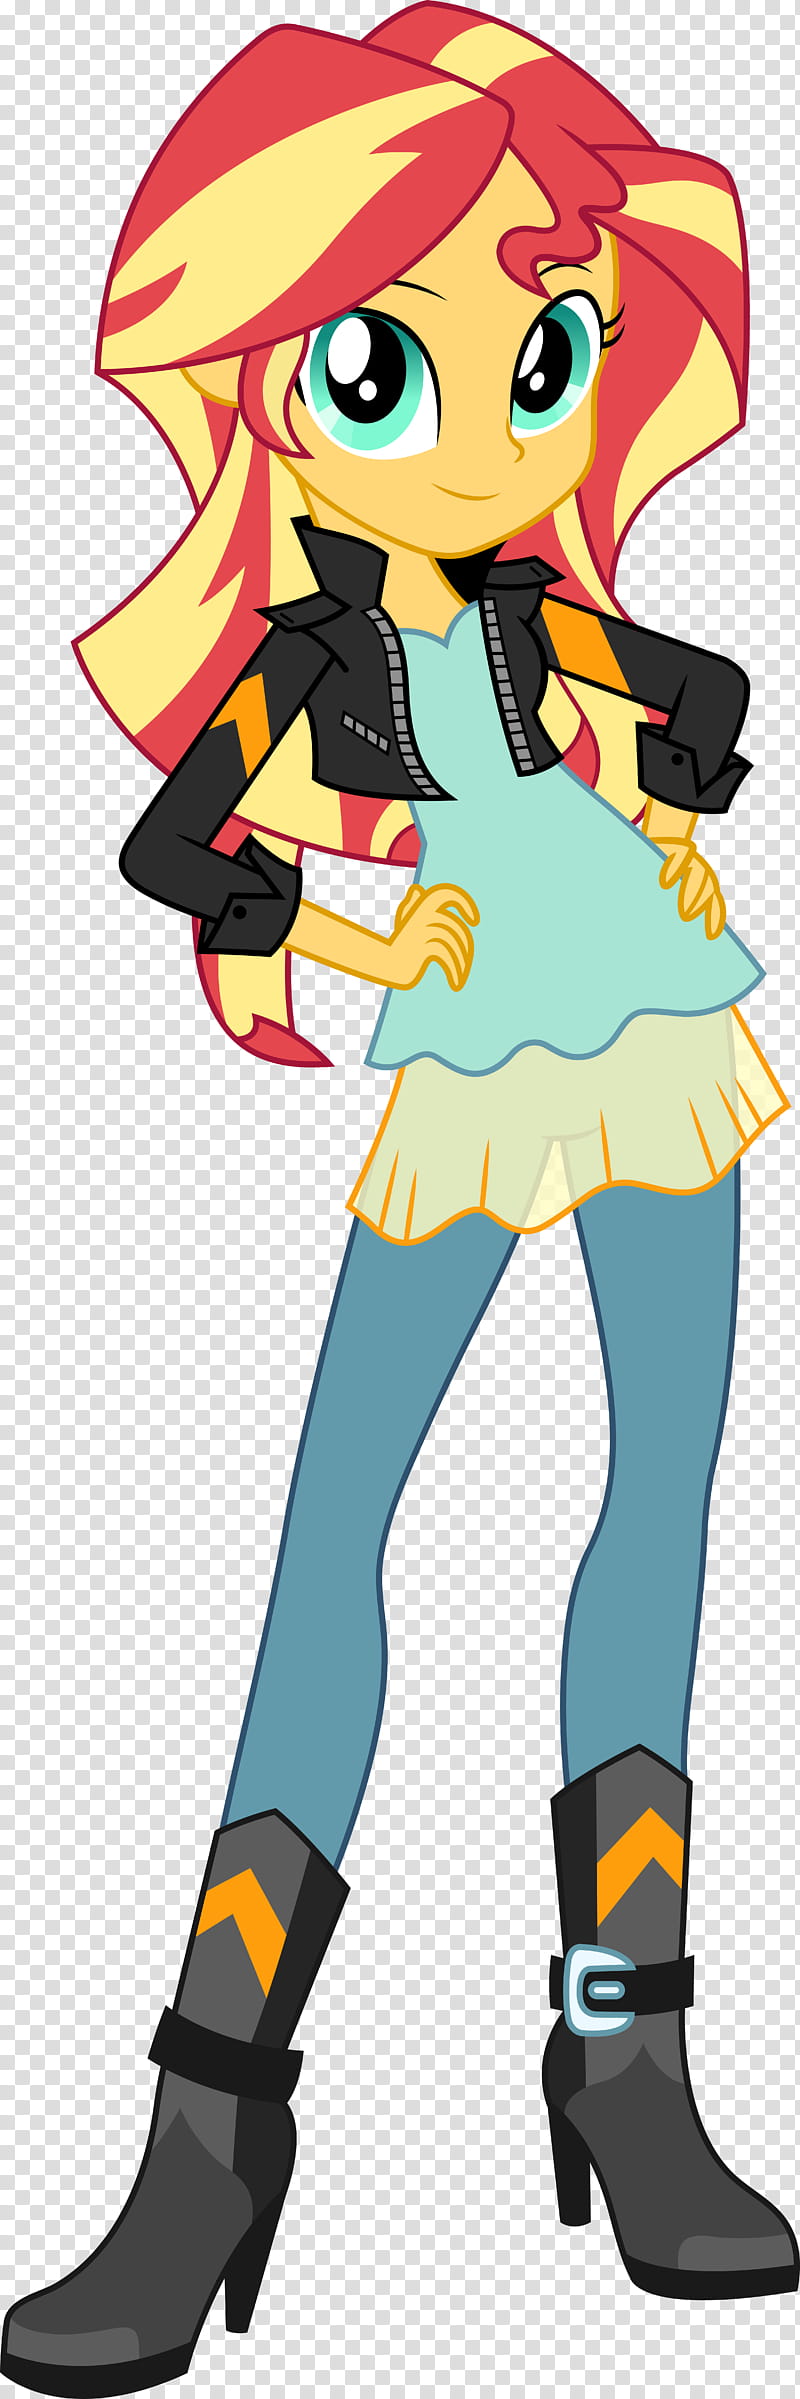 Sunset Shimmer Friendship Games Official, female cartoon character illustration transparent background PNG clipart